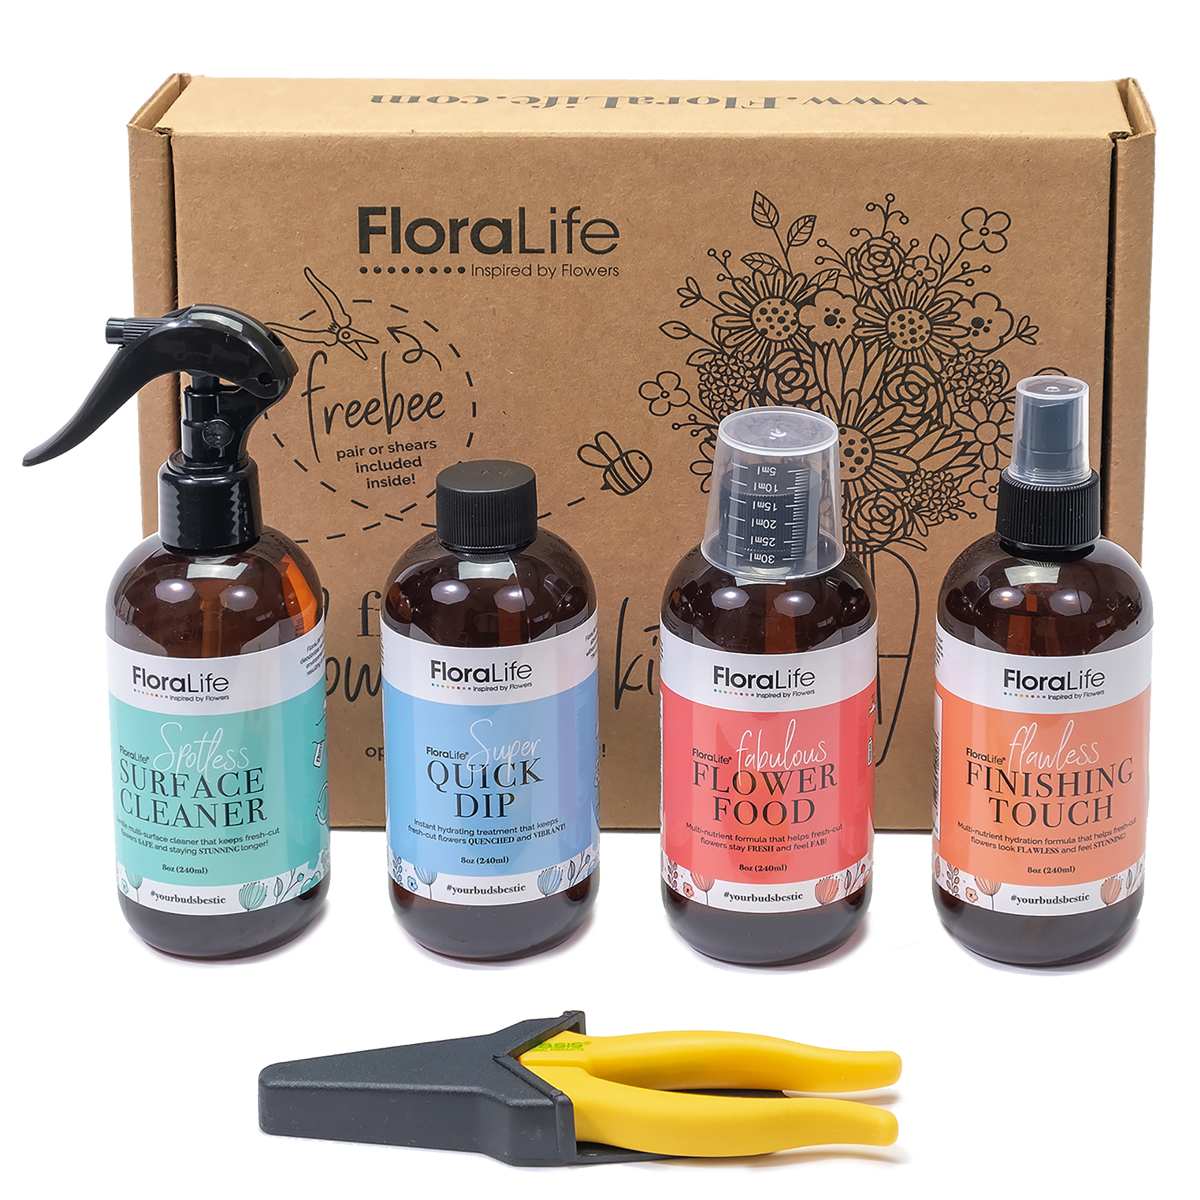 This fresh-cut flower care kit contains everything the flower enthusiast needs to ensure your best buds remain fabulous longer! Included in the #yourbudsbestie kit is everything you need for super star flower care + a free pair of handy dandy floral shears!